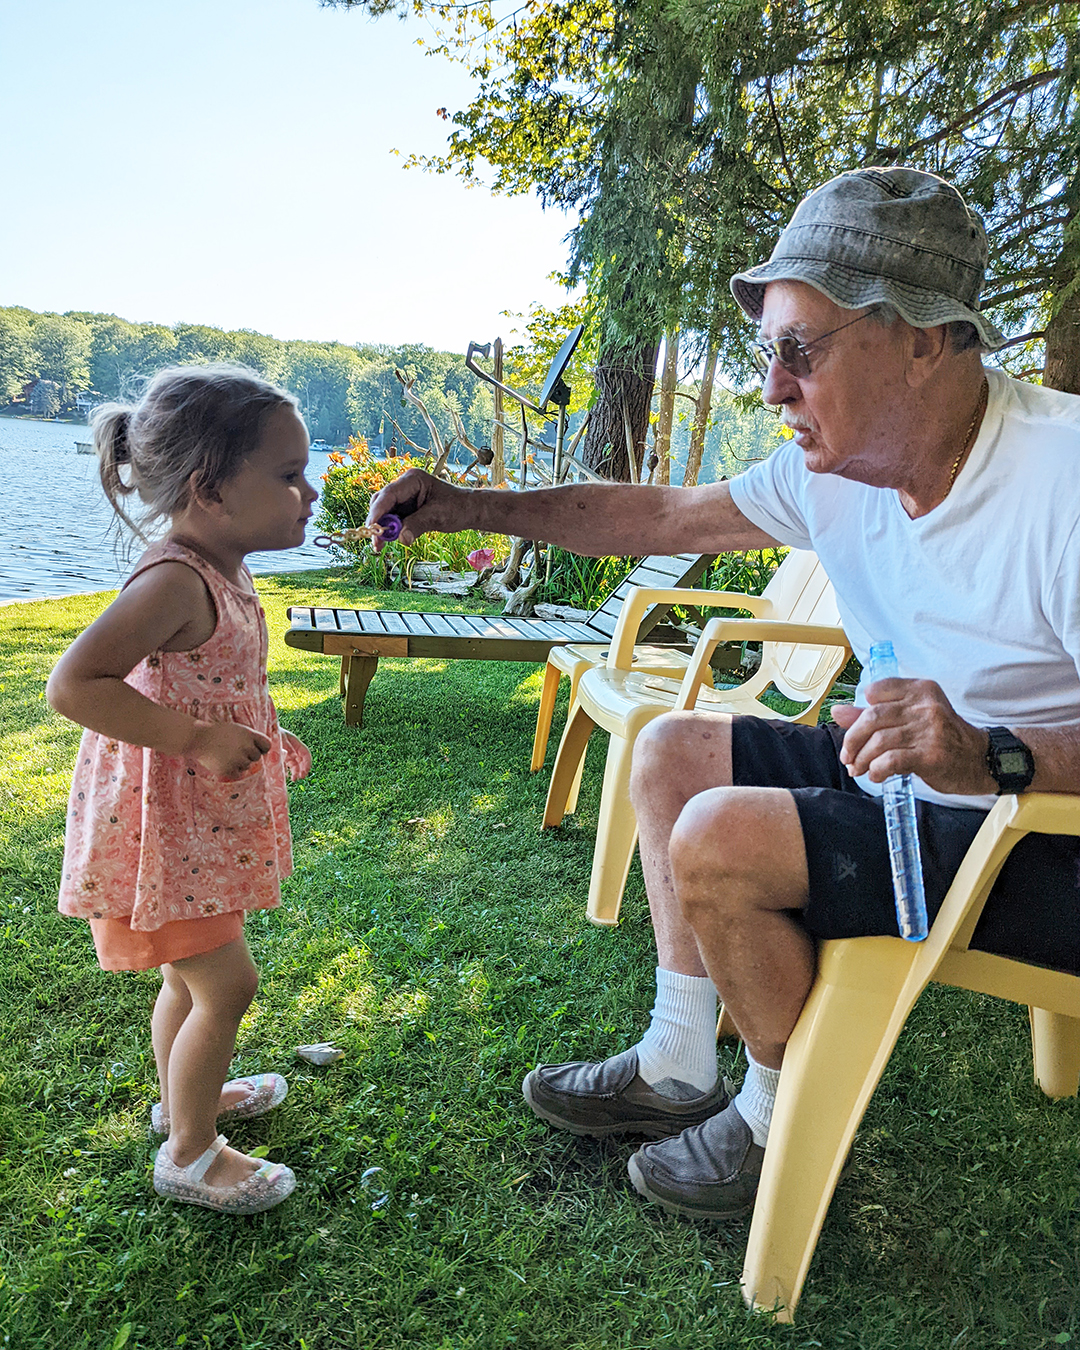 grandpa blowing bubbles with granddaughter